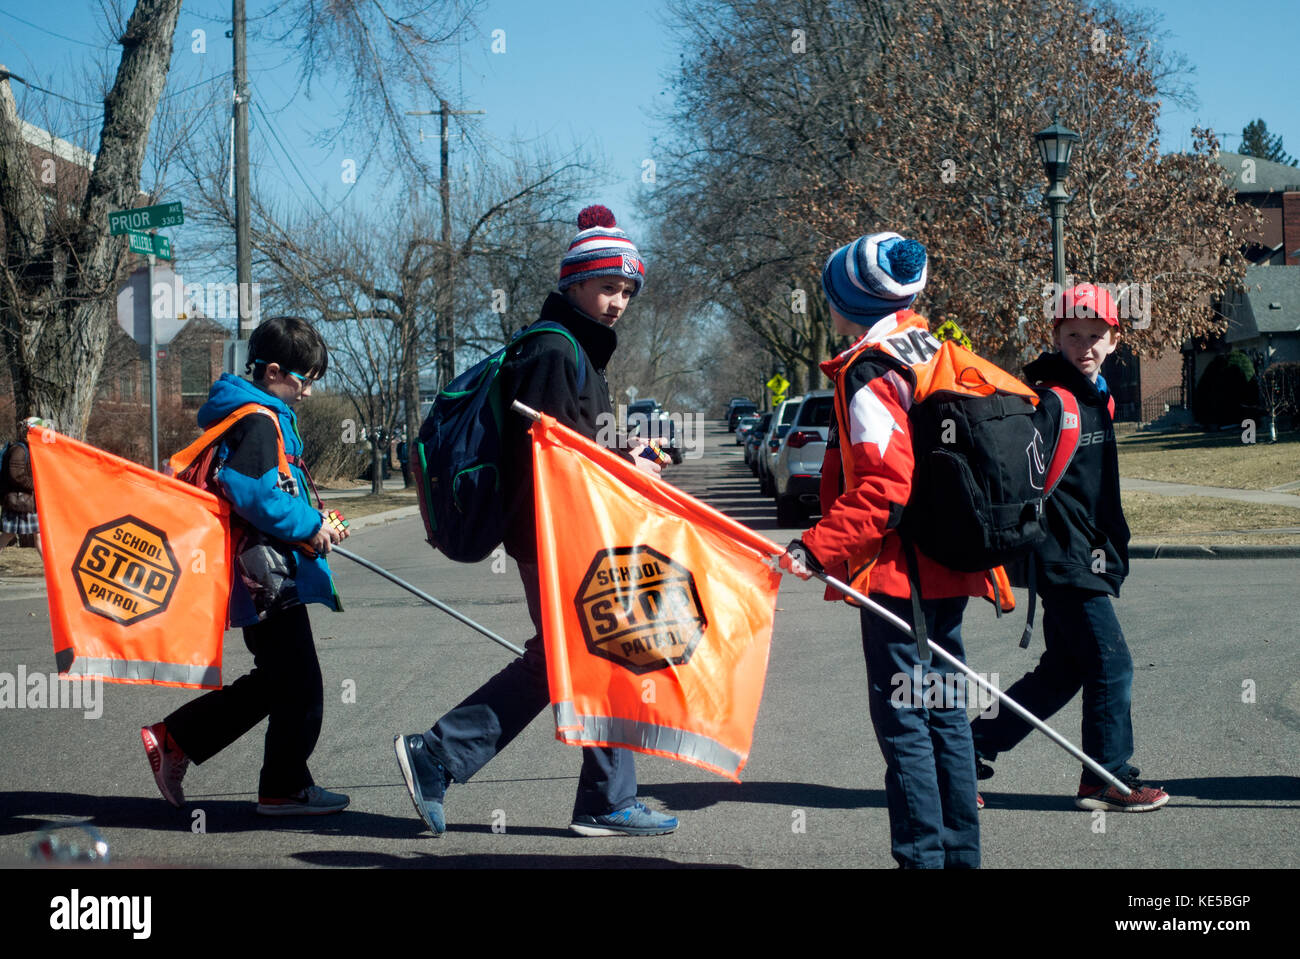 School patrol guiding students safely across the street with orange stop sign flags. St Paul Minnesota MN USA Stock Photo